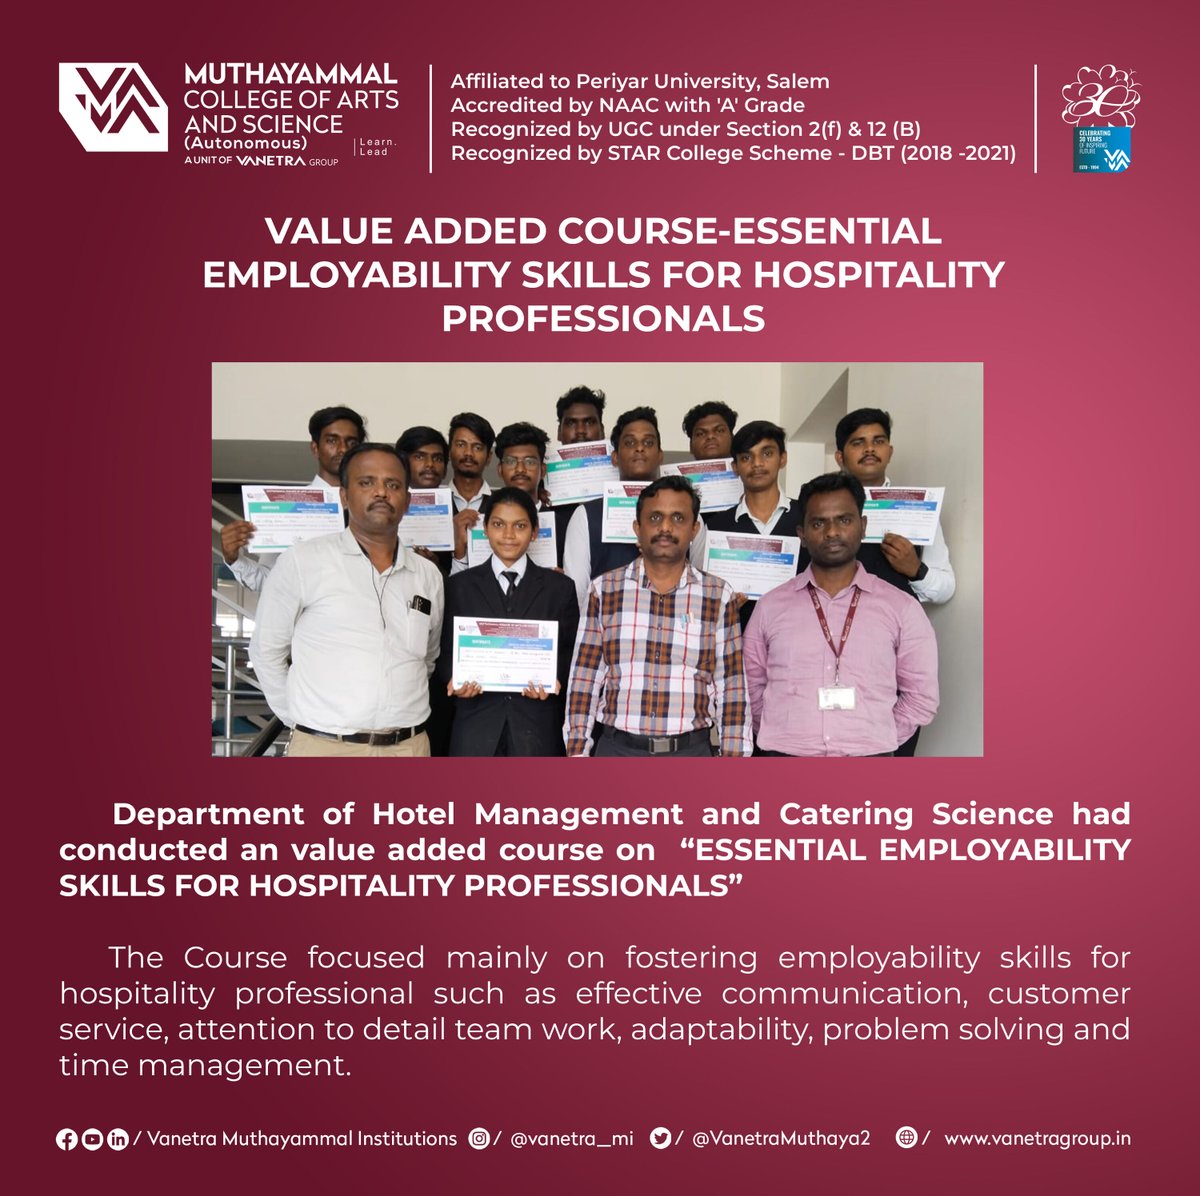 Service with a smile gets a new meaning. 

Our latest 'Essential Employability Skills for Hospitality Professionals' course has our stars rising to the occasion. 

Equip, Excel & Serve with excellence. The future of hospitality begins here! #vanetra #EmployabilitySkills #SkillUp